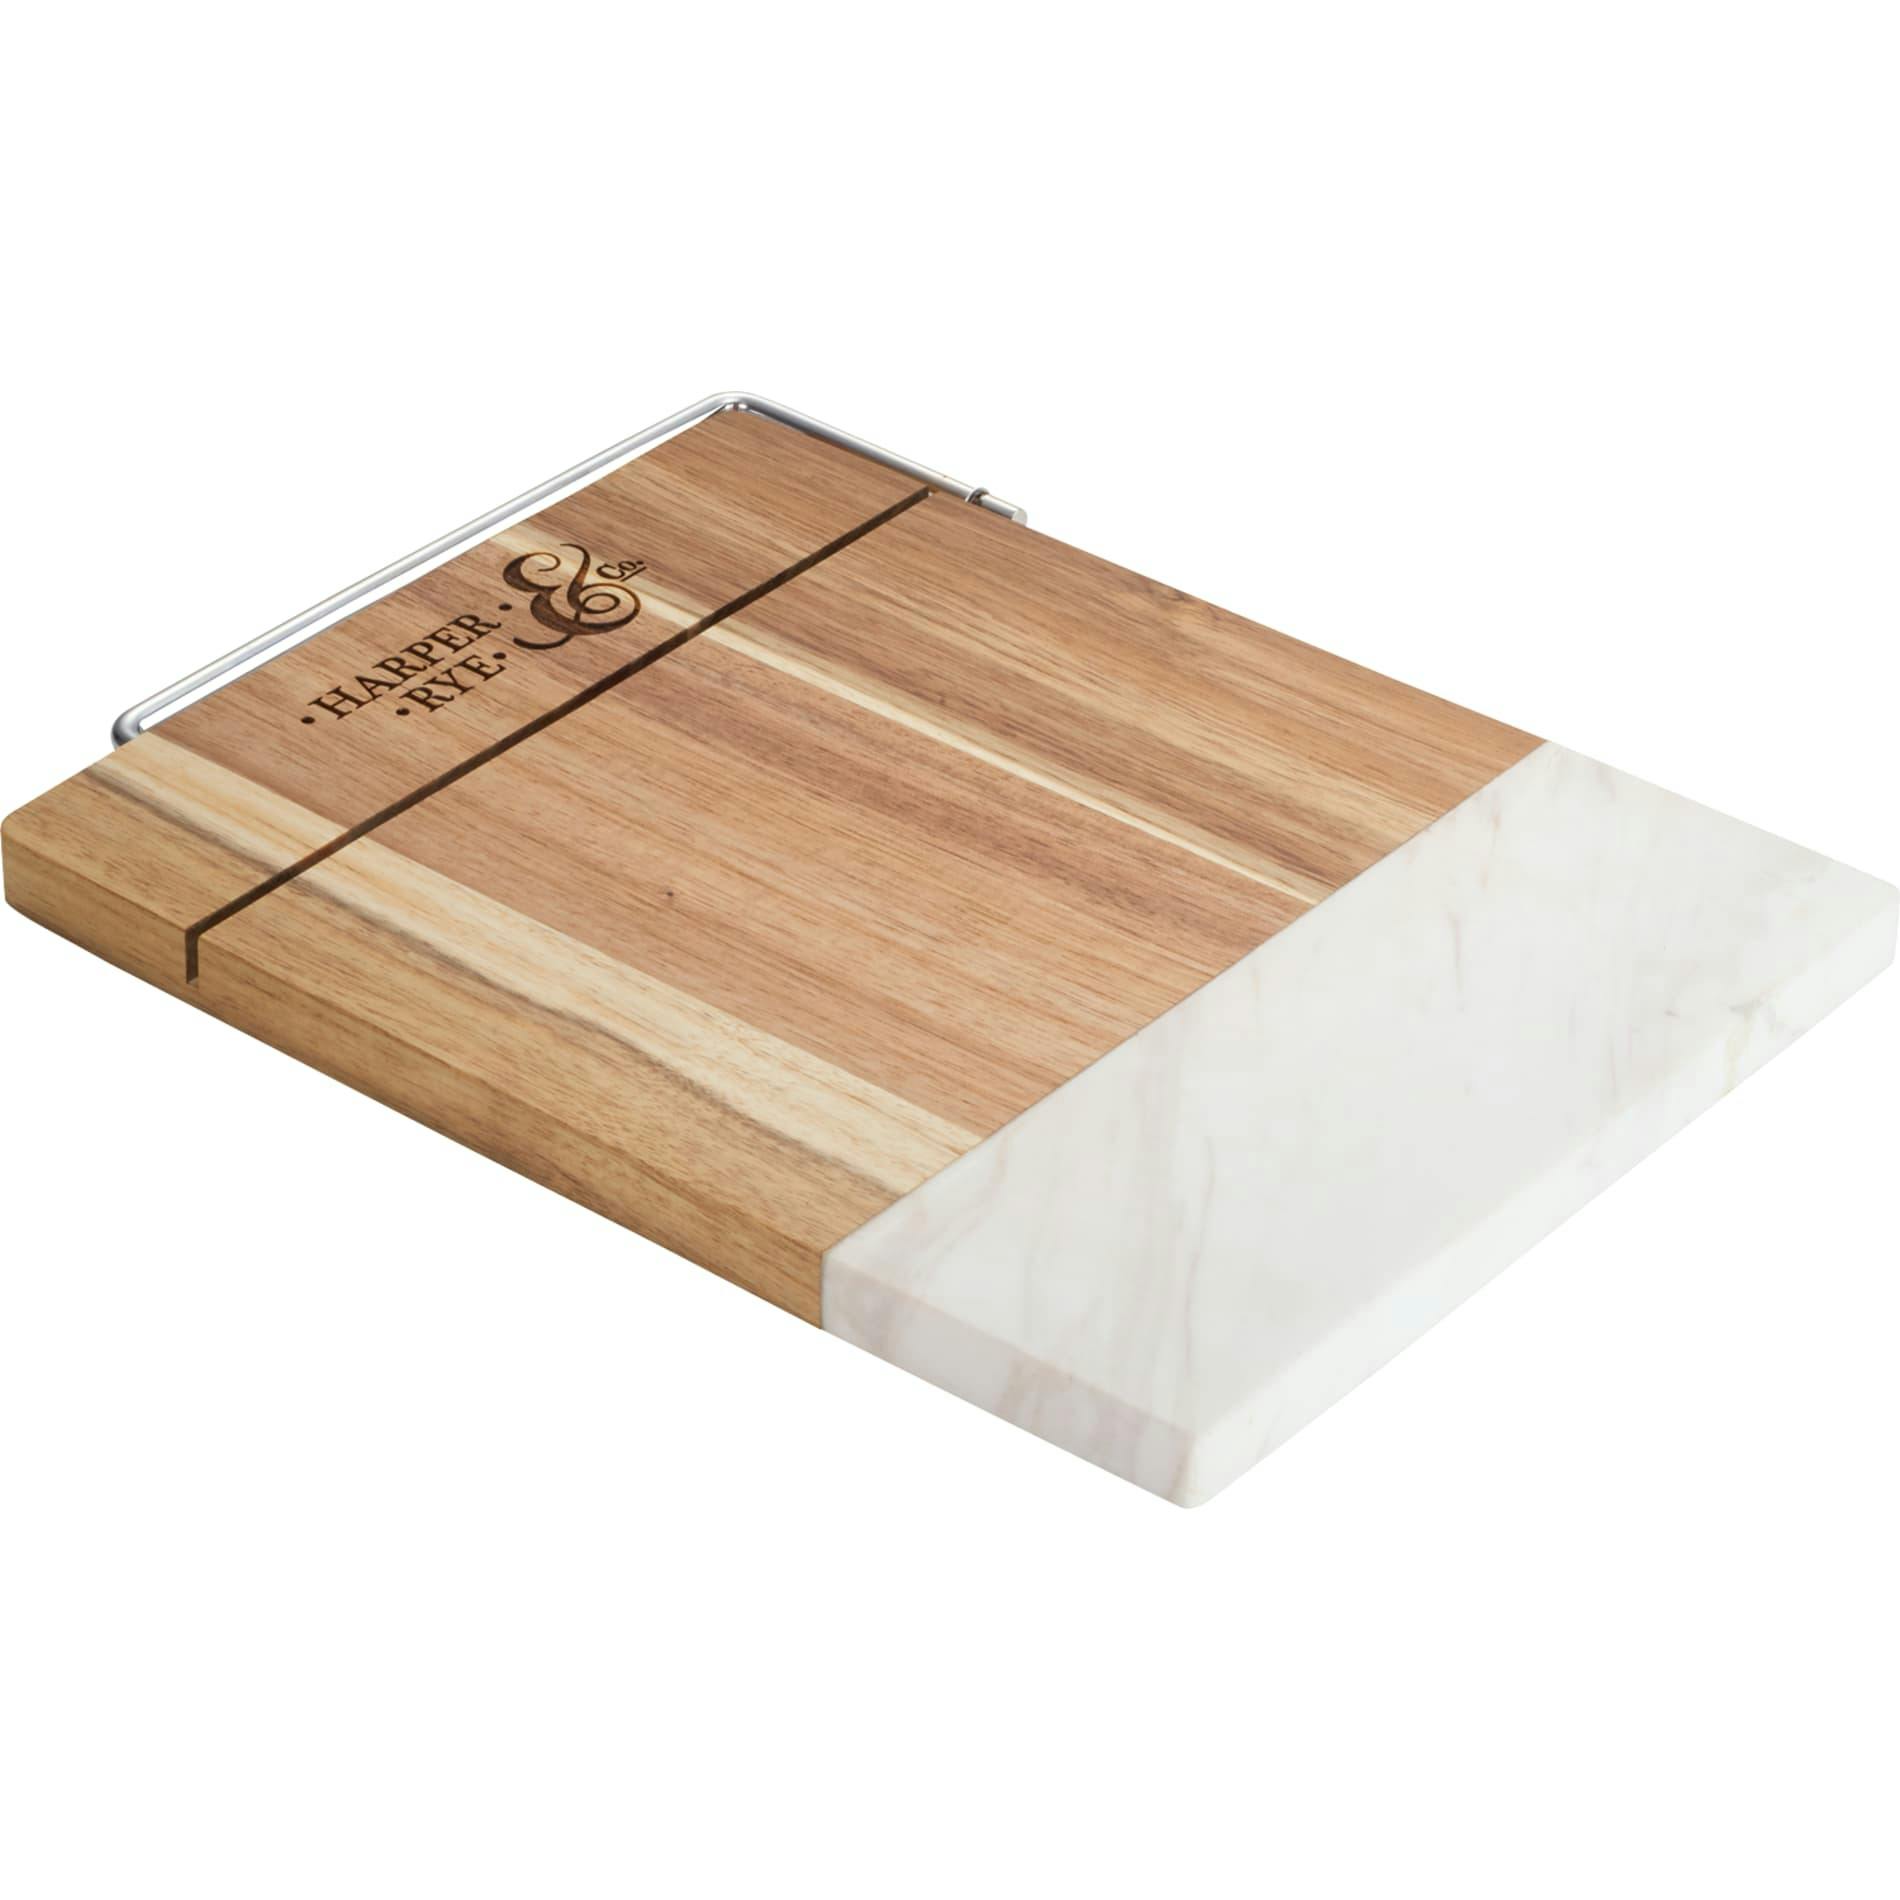 Marble and Acacia Wood Cheese Cutting Board - additional Image 2